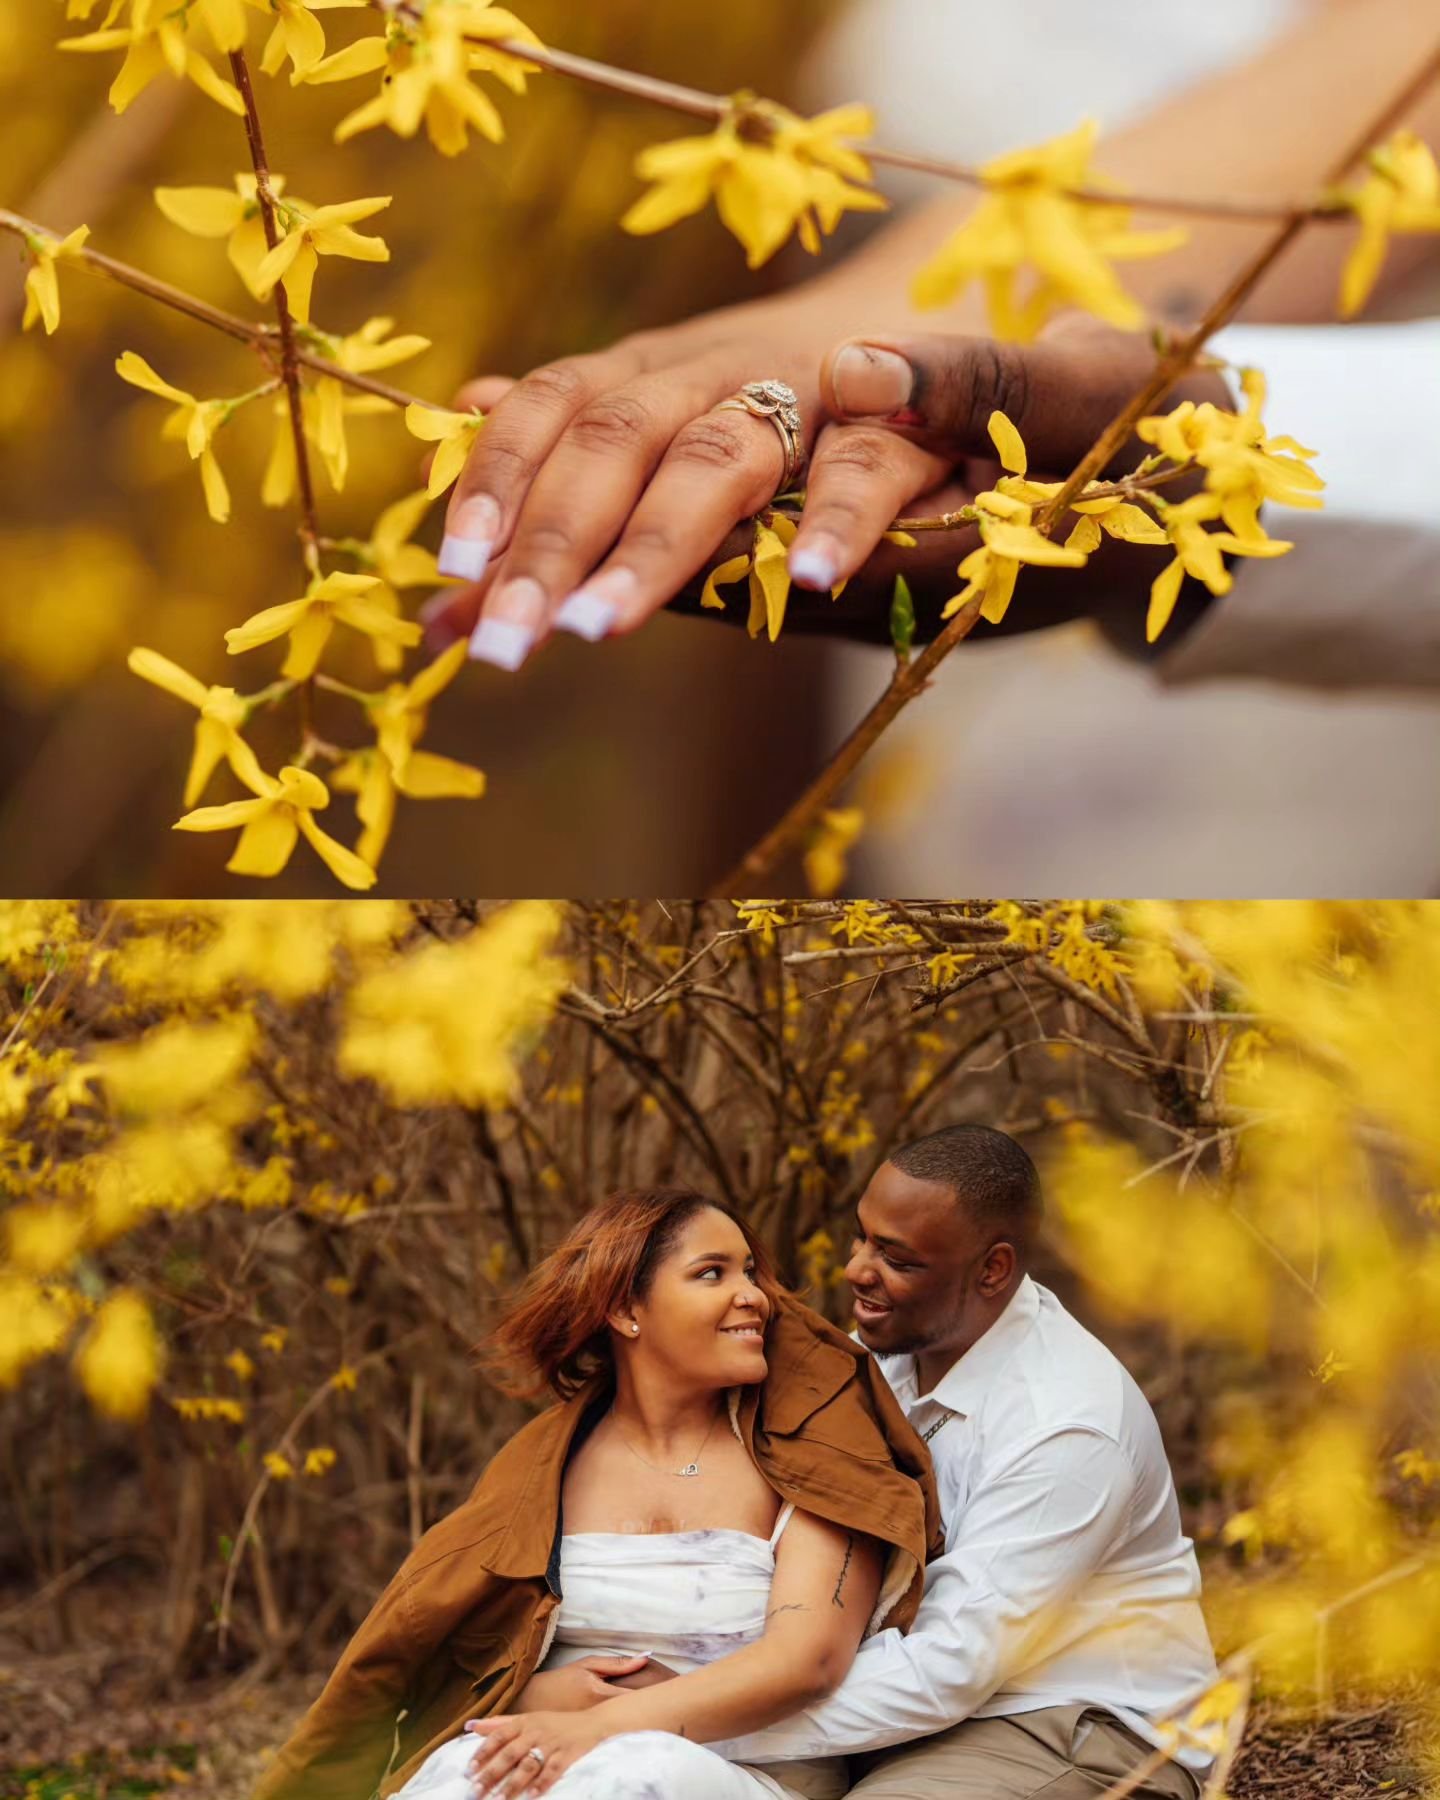 Dive into the magic of your love story amidst the vibrant blooms of Borderland State Park! Let me sprinkle creativity, colors, and authenticity into your engagement photos, making each moment uniquely yours. Don't miss out on capturing your love like